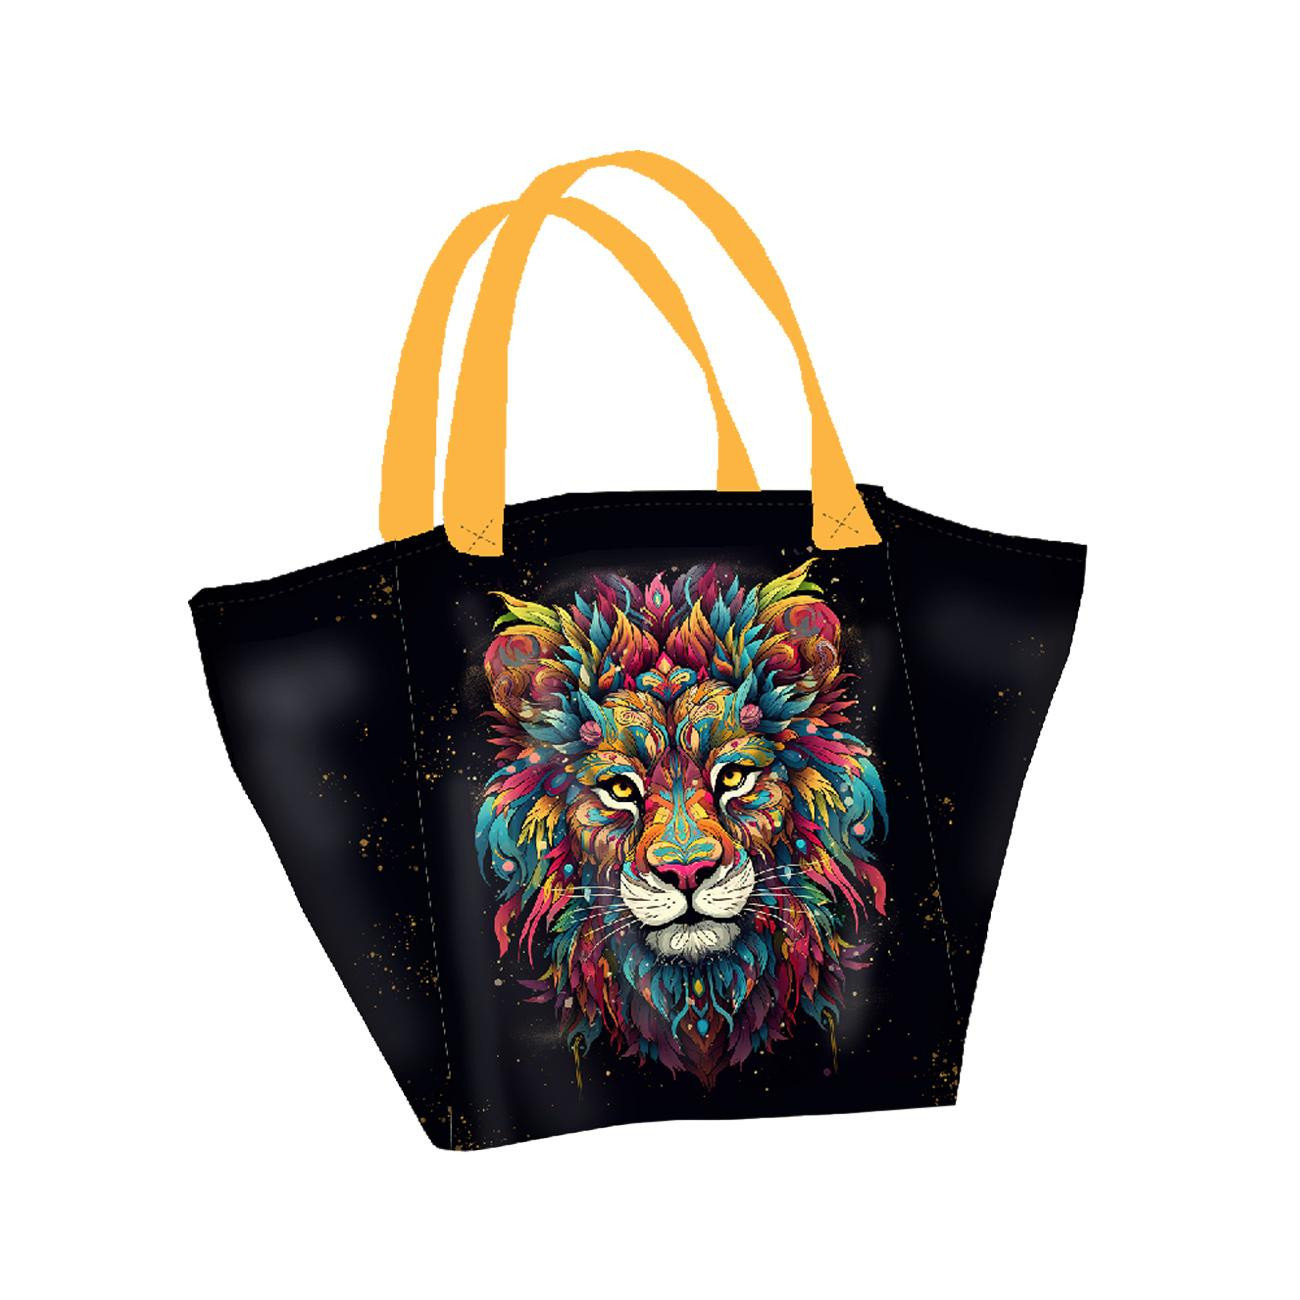 XL bag with in-bag pouch 2 in 1 - COLORFUL LION - sewing set